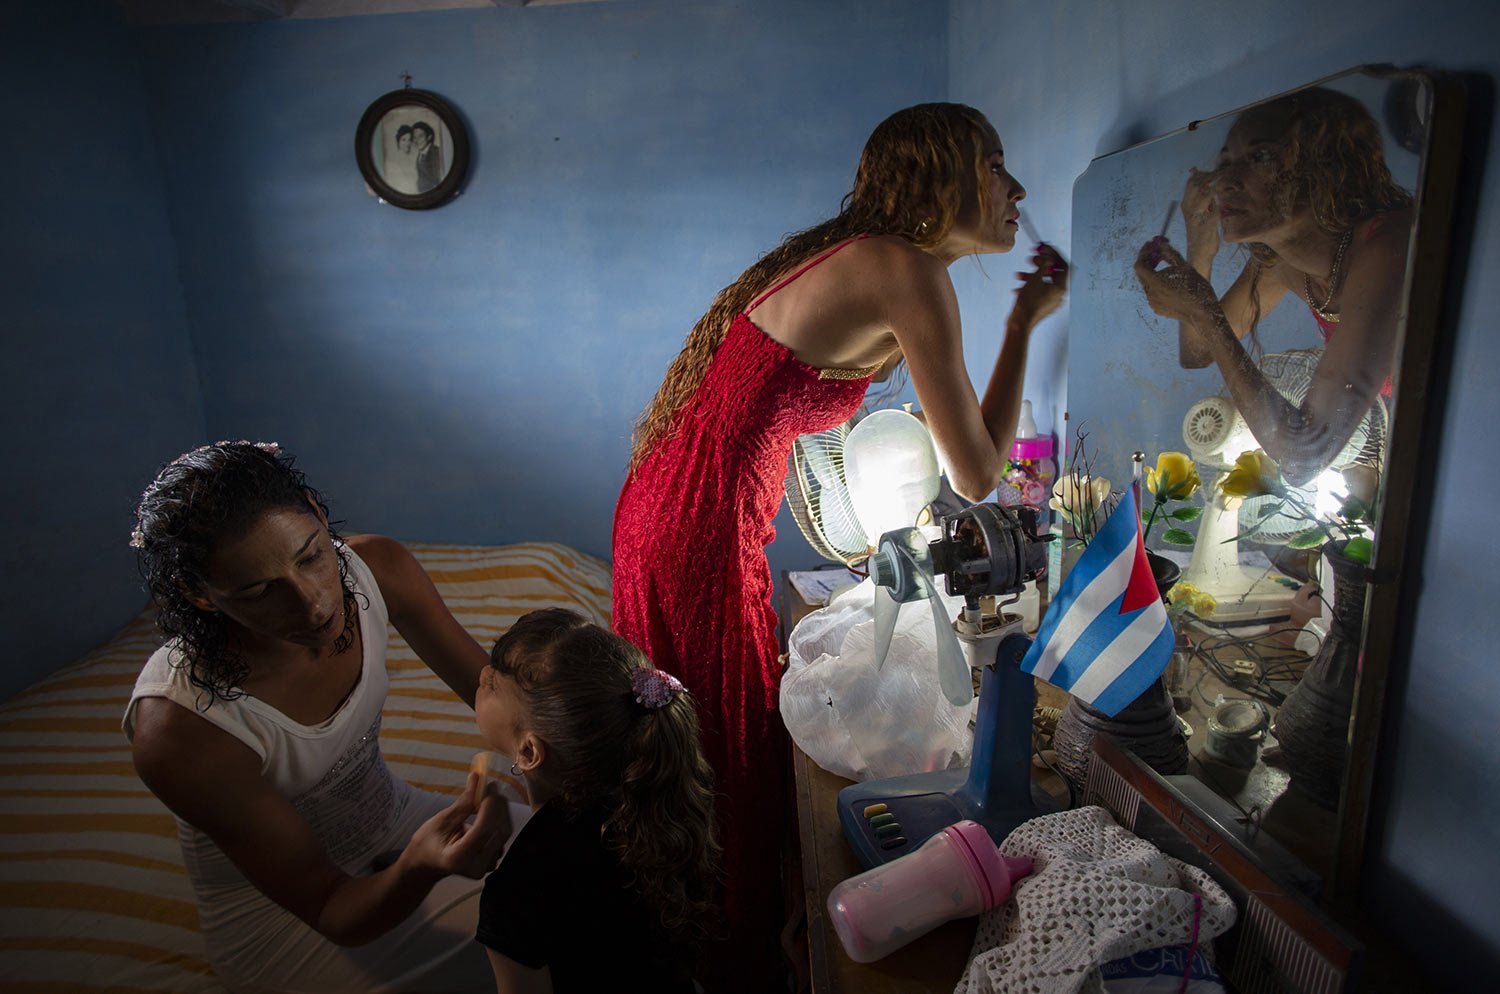  Liusba Grajales, left, puts makeup on her daughter Ainhoa as her partner Lisset Diaz Vallejo gets ready for their wedding ceremony, in Santa Clara, Cuba, Friday, Oct. 21, 2022. The couple, which has been together for seven years, is one of the first